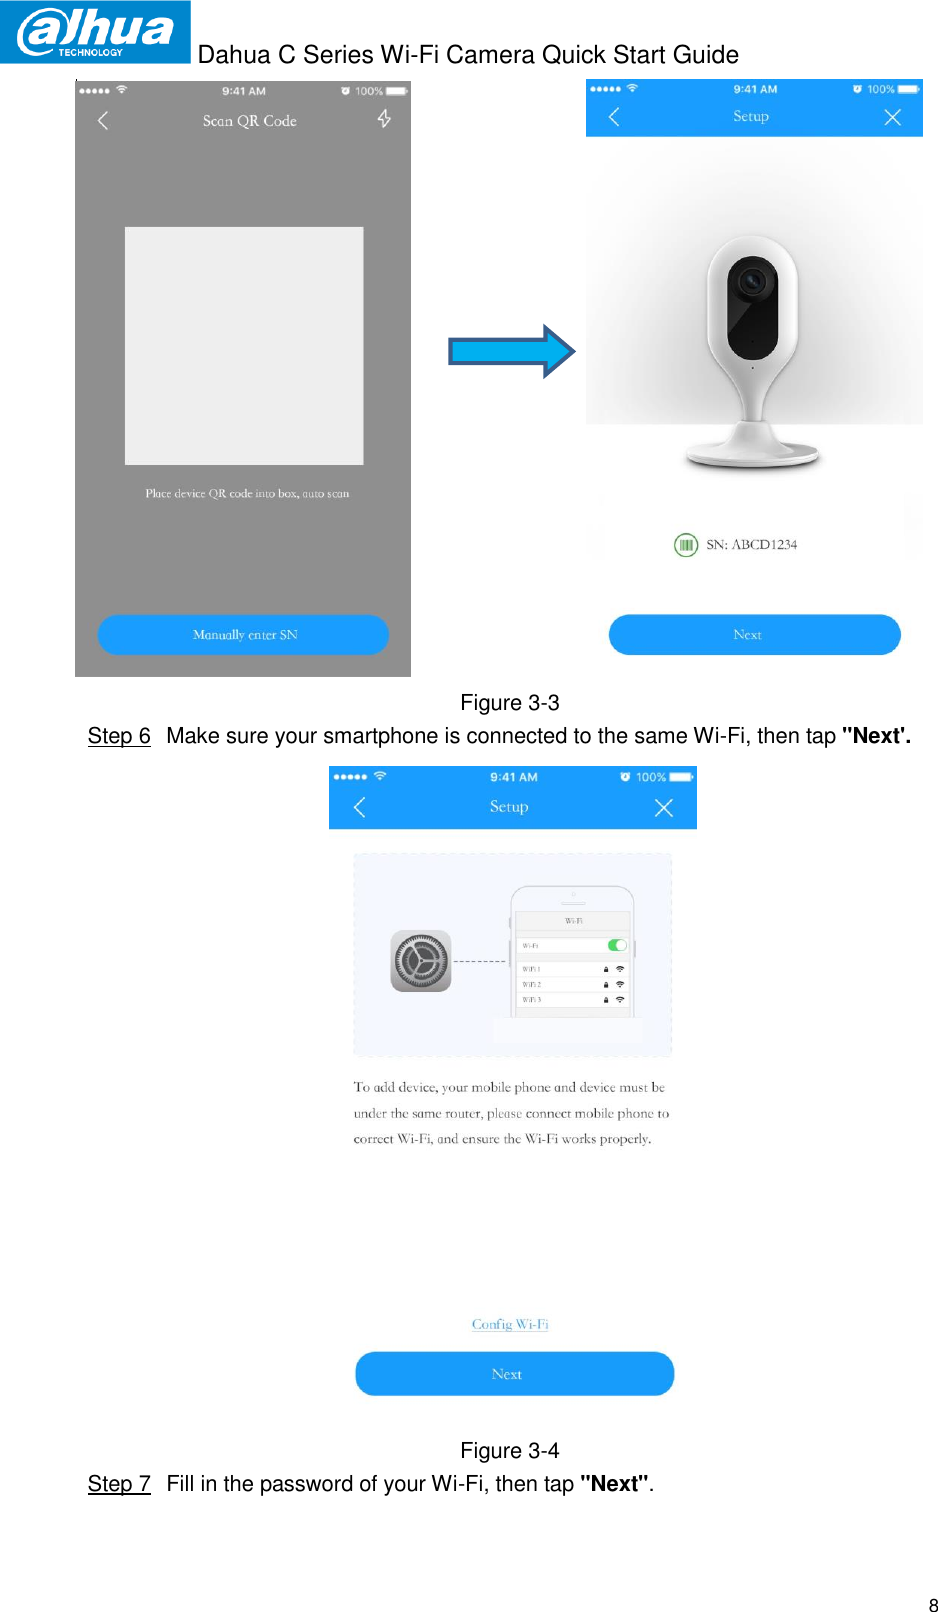  Dahua C Series Wi-Fi Camera Quick Start Guide   8                                 Figure 3-3  Step 6  Make sure your smartphone is connected to the same Wi-Fi, then tap &quot;Next&apos;.  Figure 3-4  Step 7  Fill in the password of your Wi-Fi, then tap &quot;Next&quot;. 